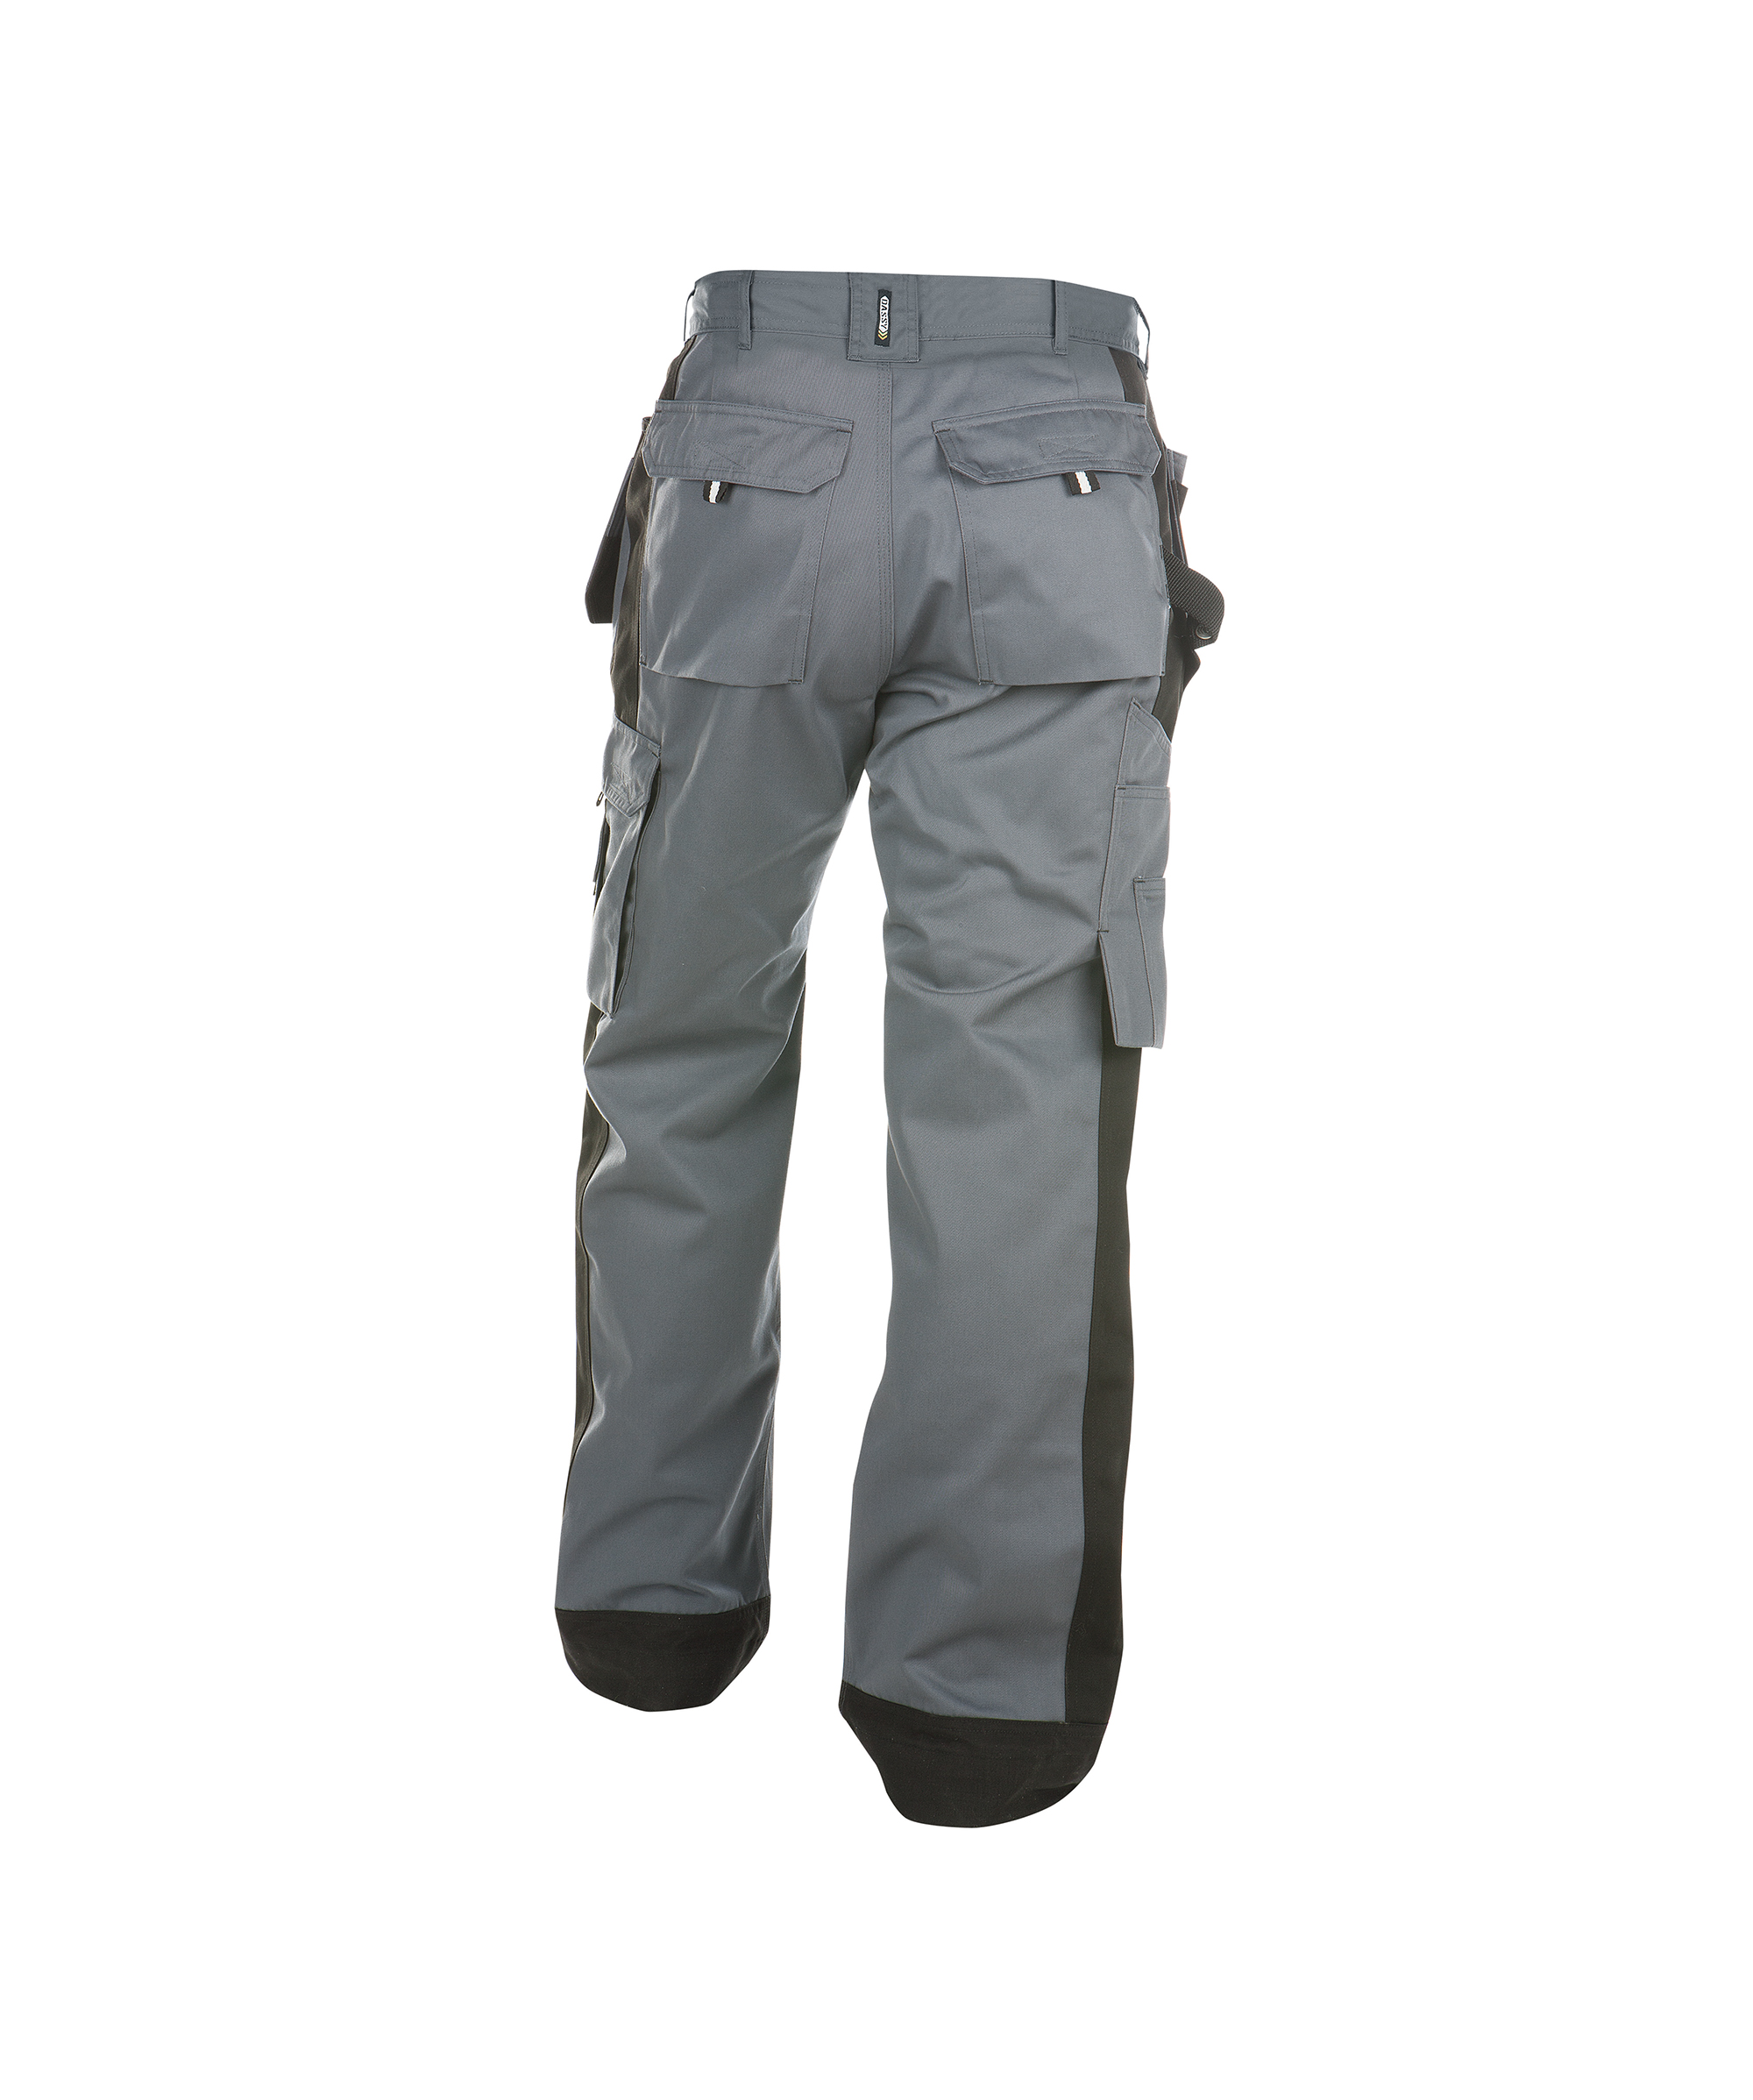 seattle_two-tone-work-trousers-with-multi-pockets-and-knee-pockets_cement-grey-black_back.jpg